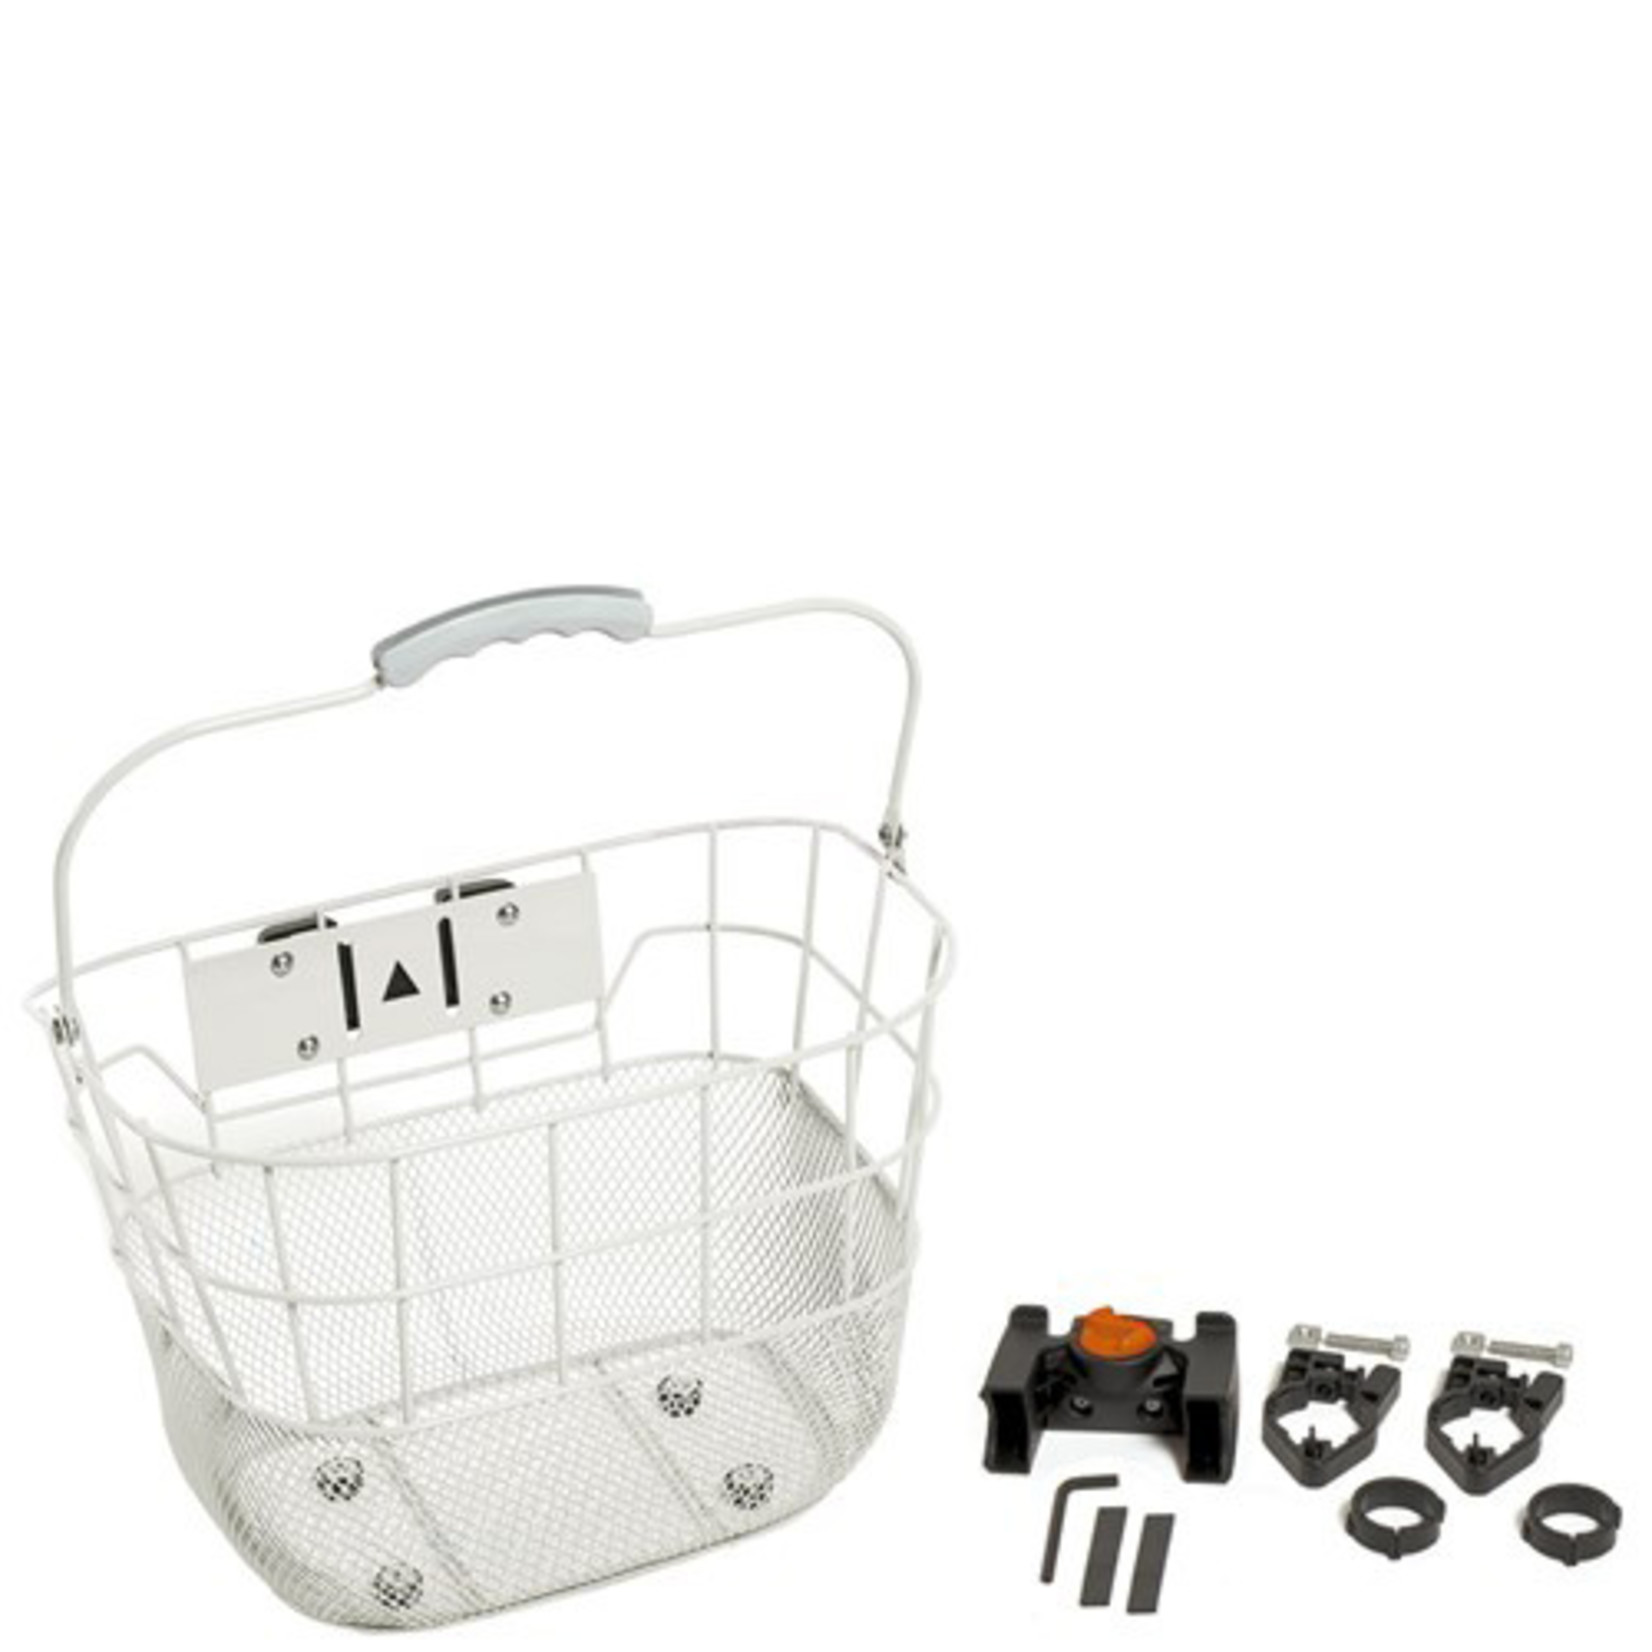 Bikecorp BC Bicycle Front Basket Mesh - Quick Release Fits Up To 31.8 Handlebars - White